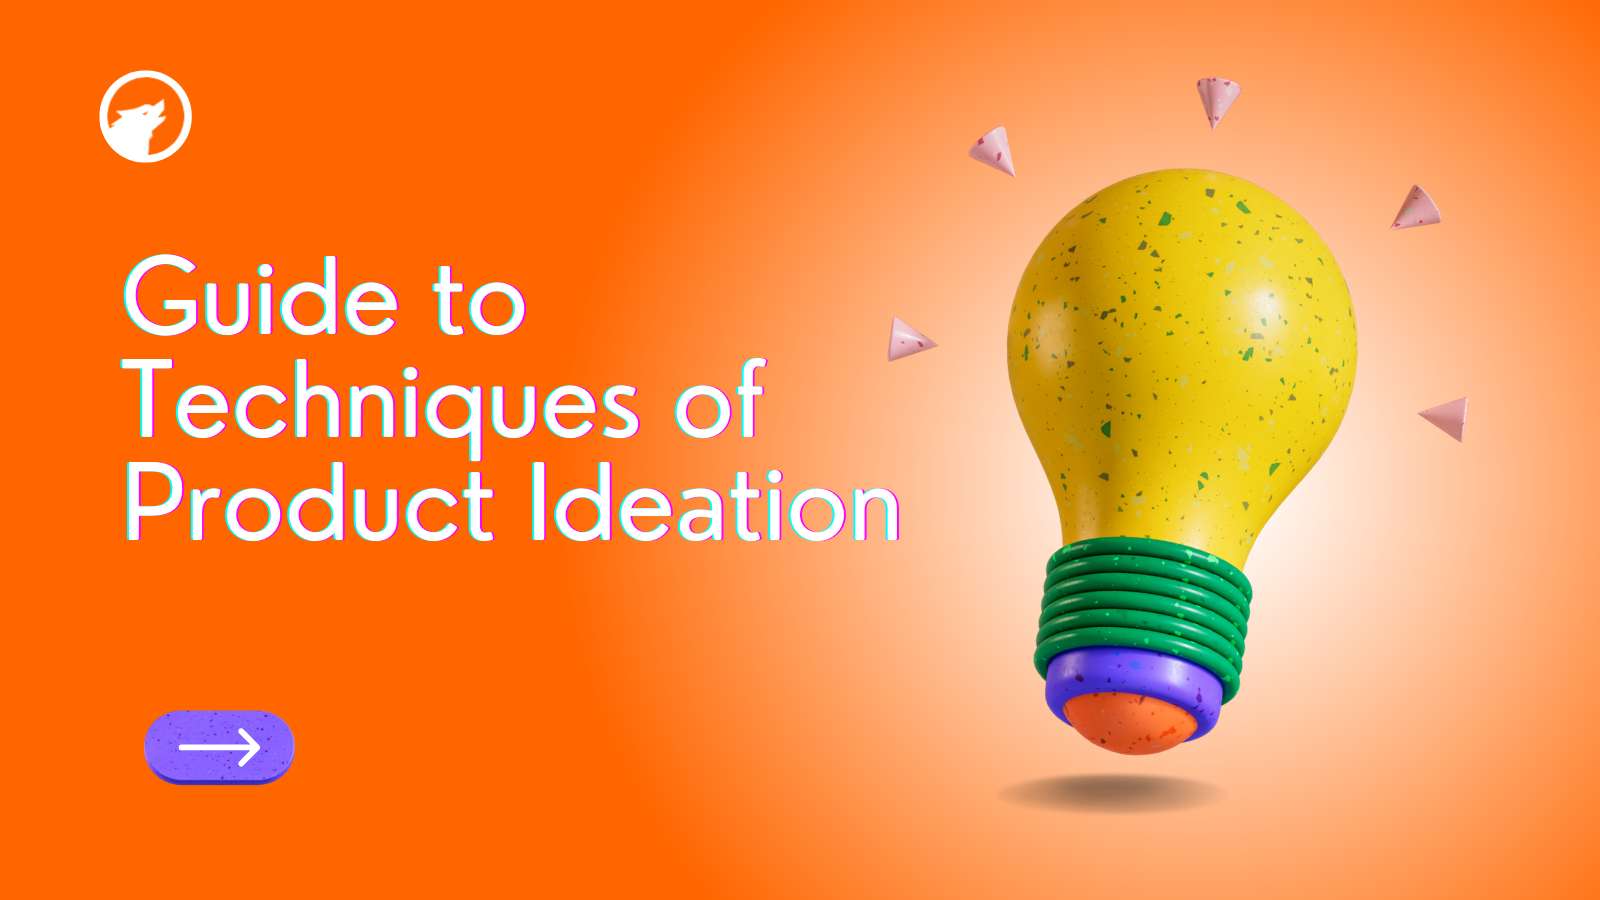 Guide to Techniques of Product Ideation